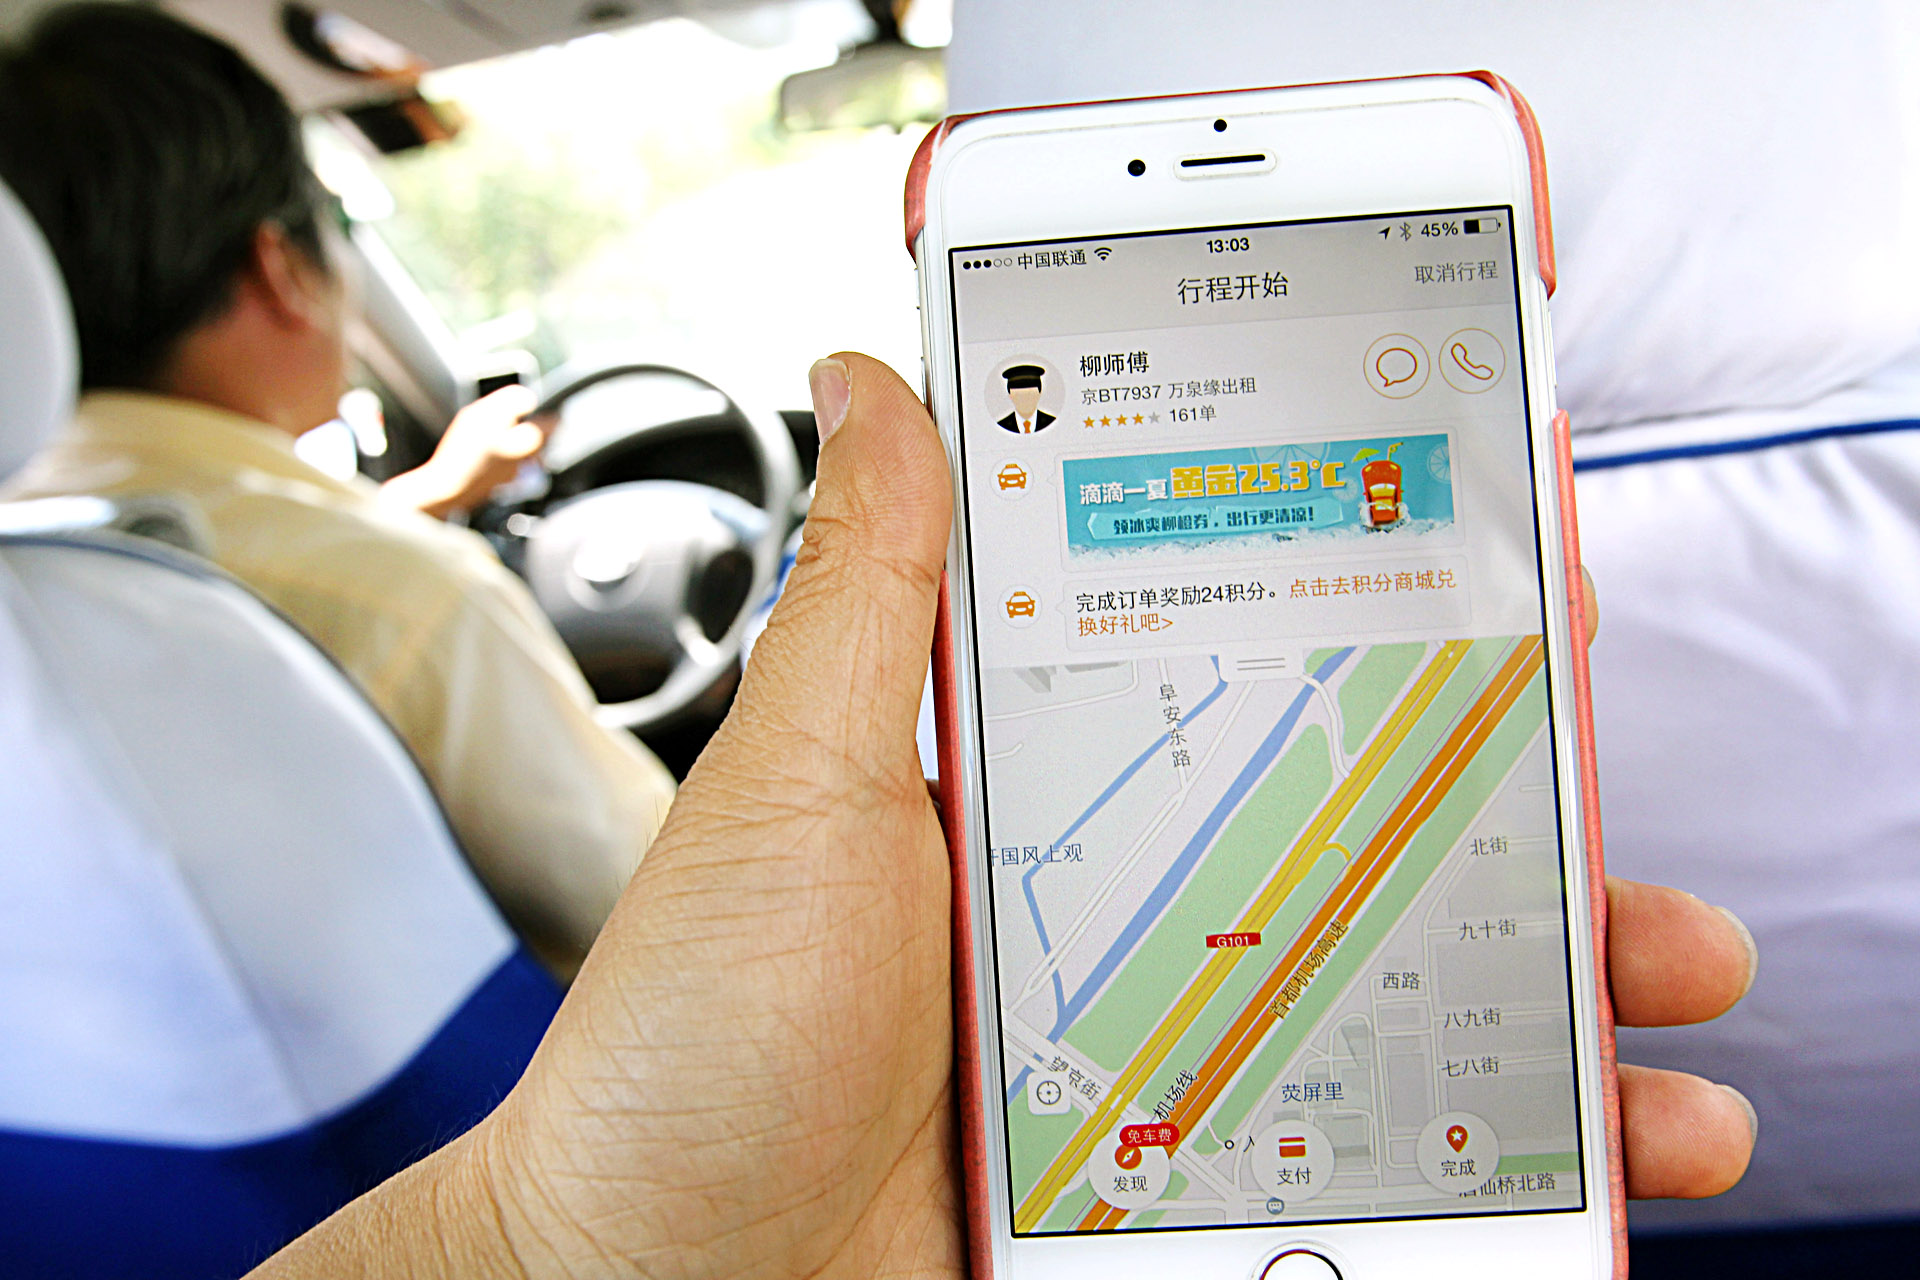 Proposed Regulations Threaten Didi, Uber, Other Car-Hailing Services in Beijing